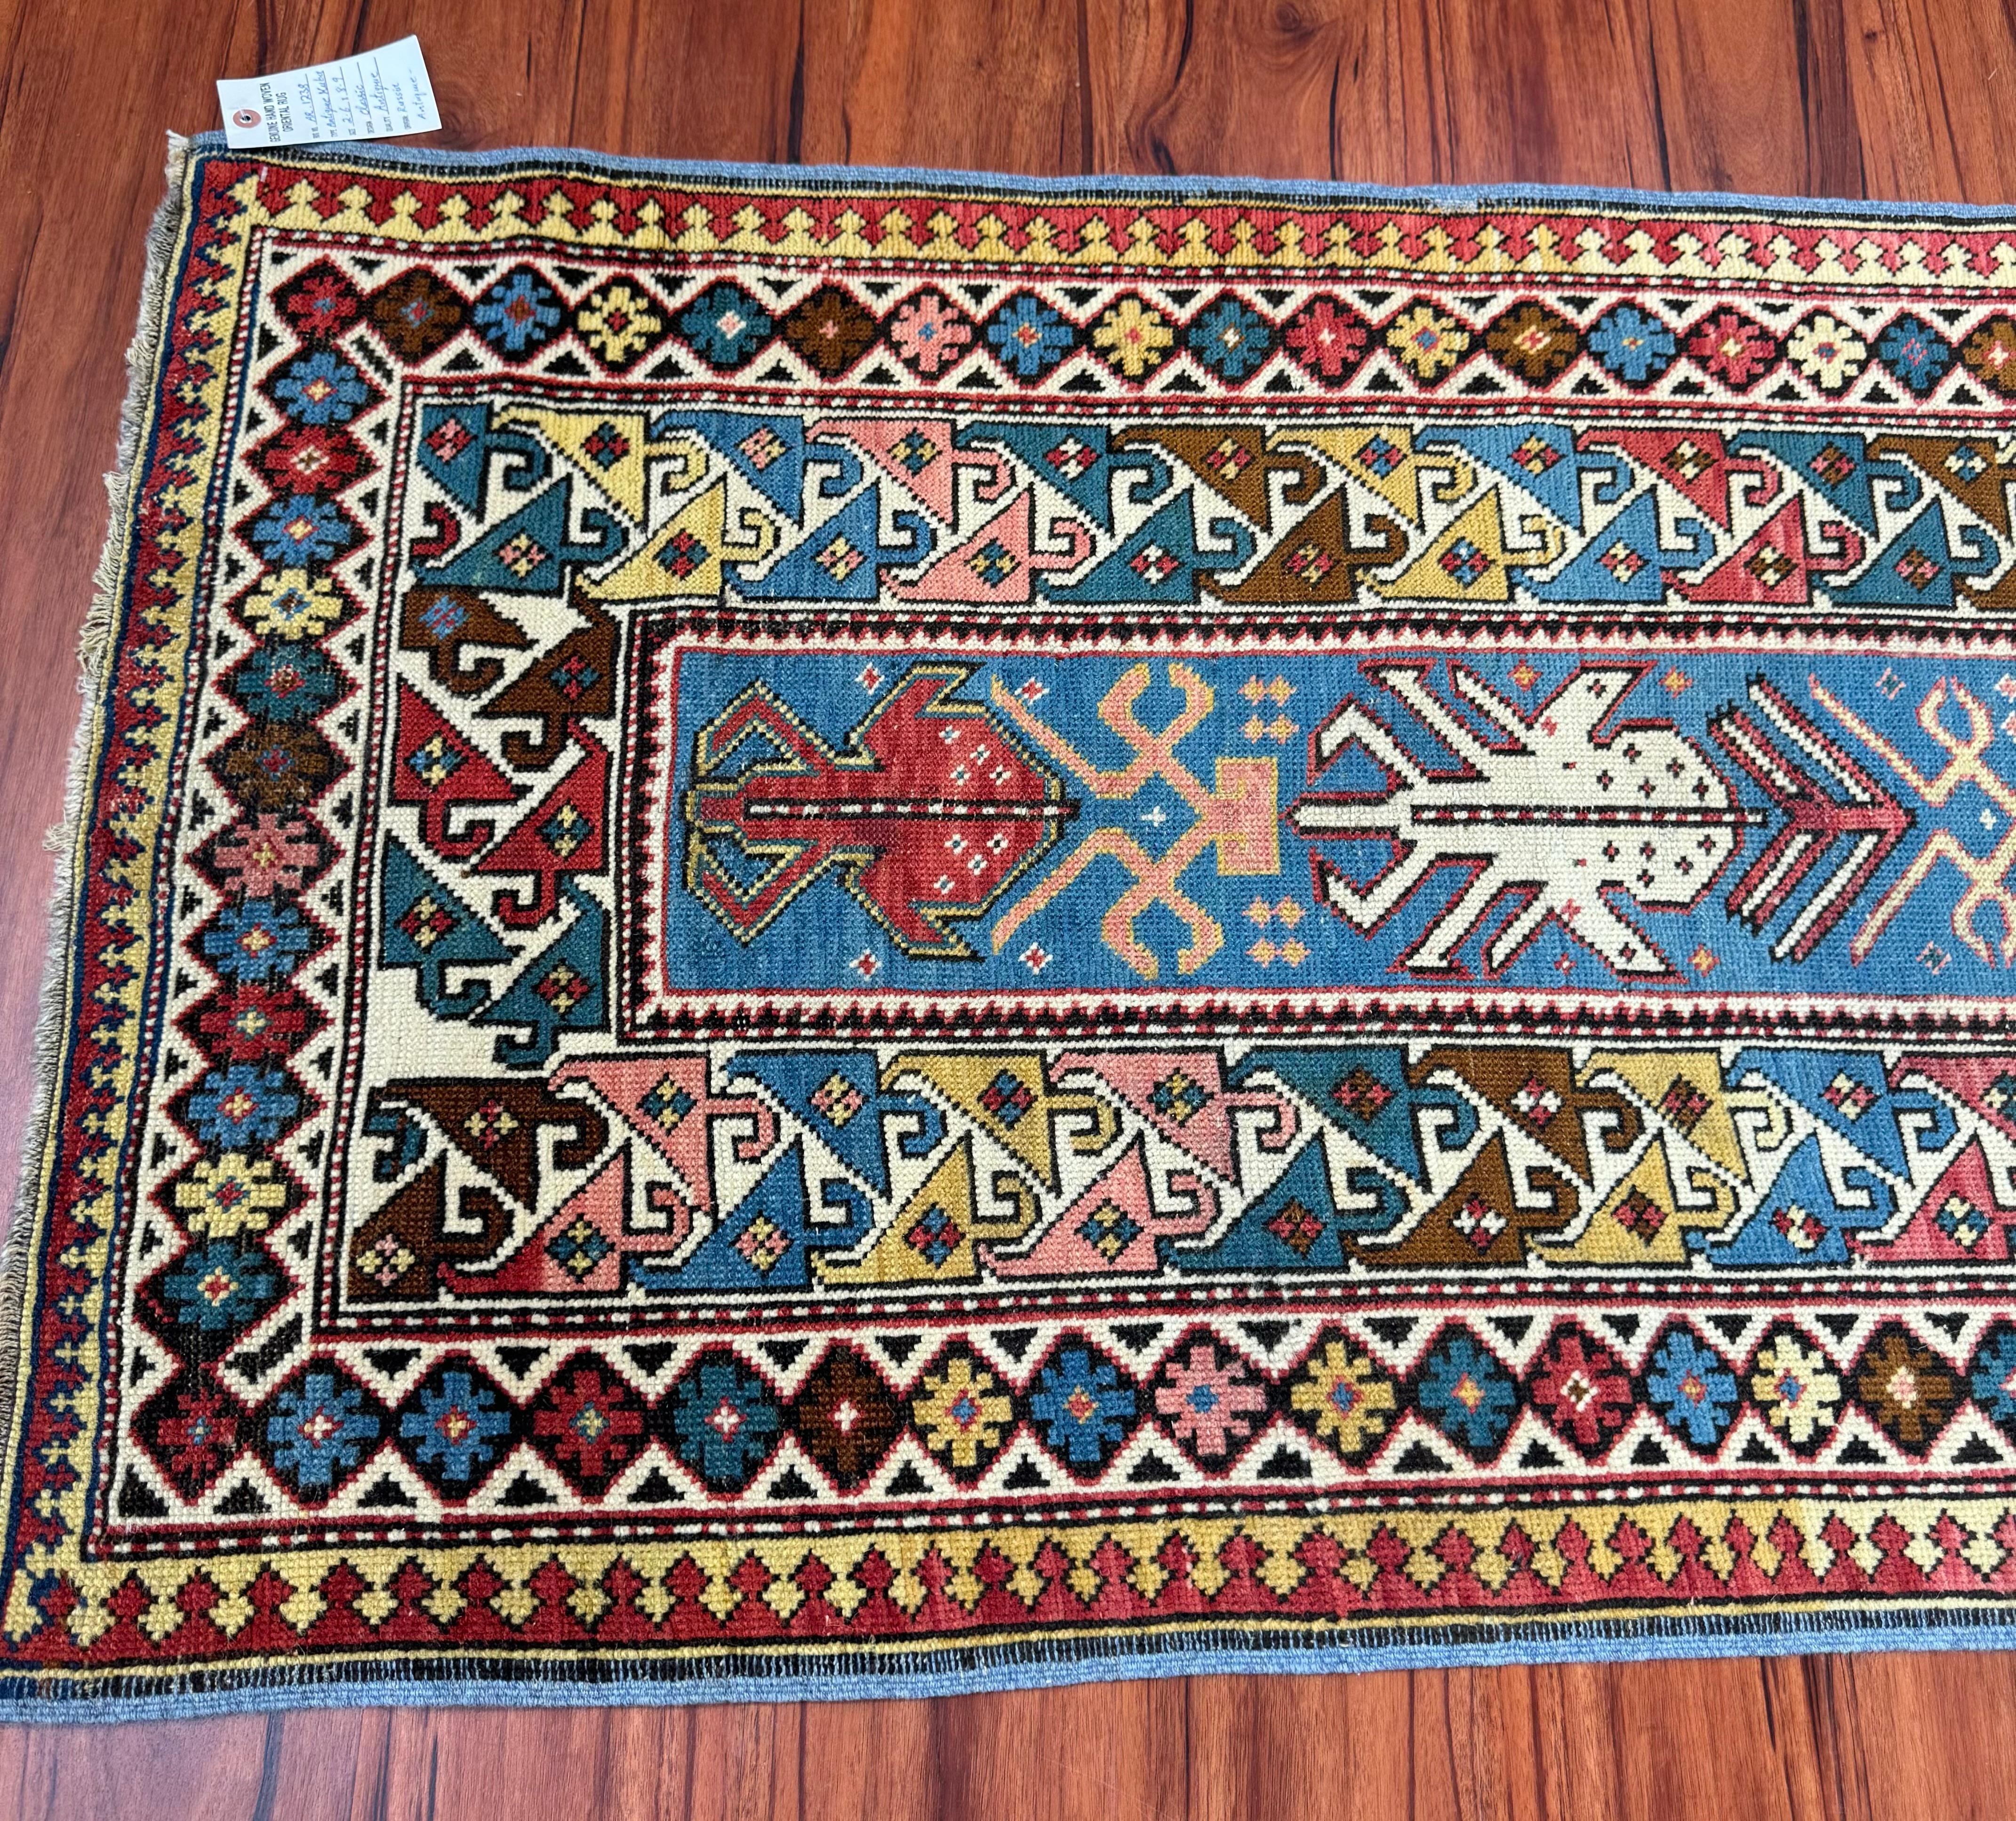 A stunning Antique Caucasian/Kuba Runner Rug that was made around the 1890s. This rug is in excellent condition considering its rich history. A truly stunning piece with beautiful color combinations to match its design! 